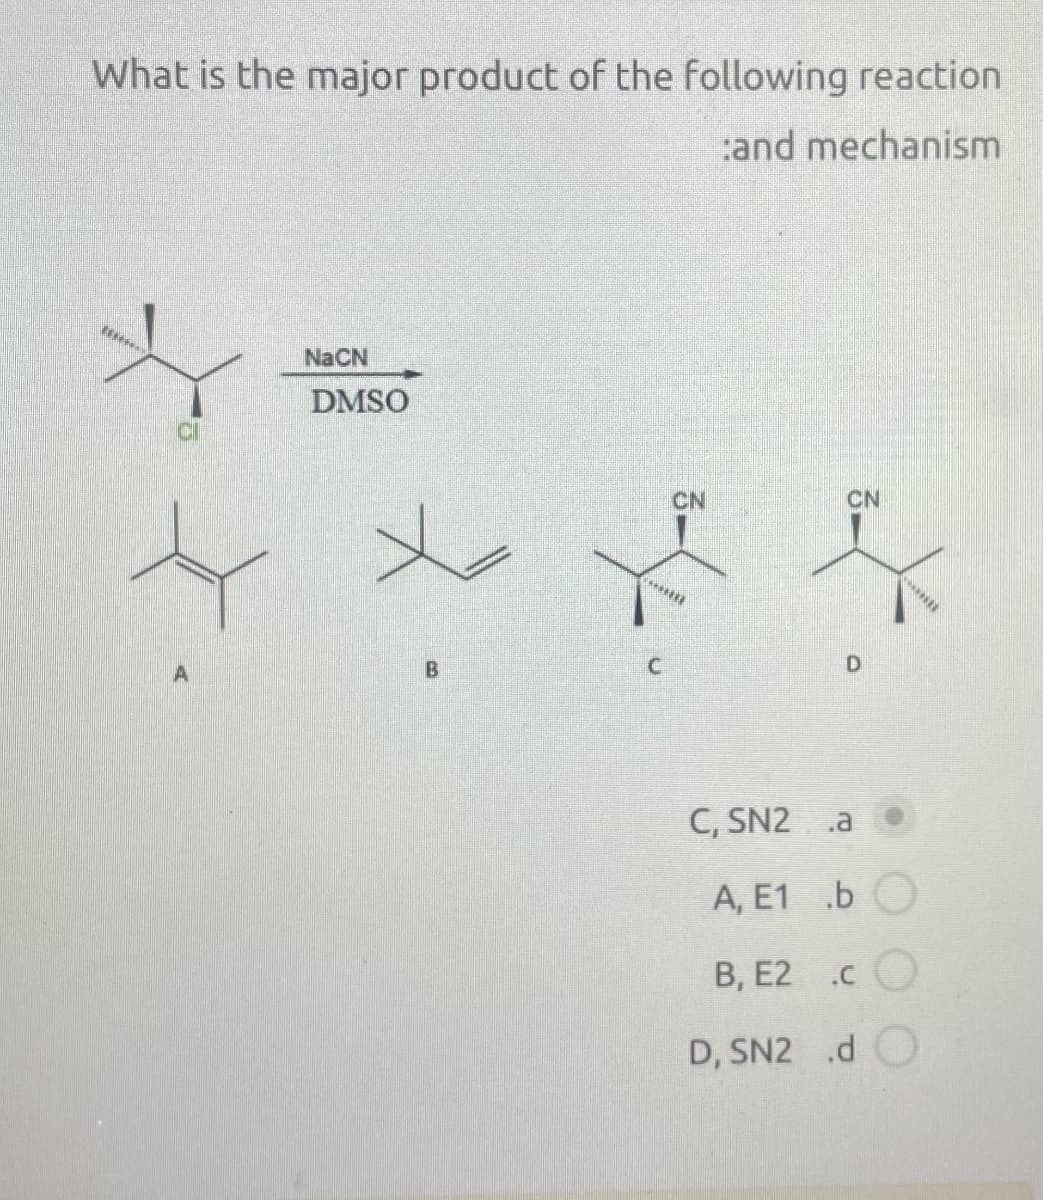 What is the major product of the following reaction
NaCN
DMSO
:and mechanism
CN
CN
B
C
D
C, SN2 .a
A, E1 .b
B, E2.C
D, SN2 .d O